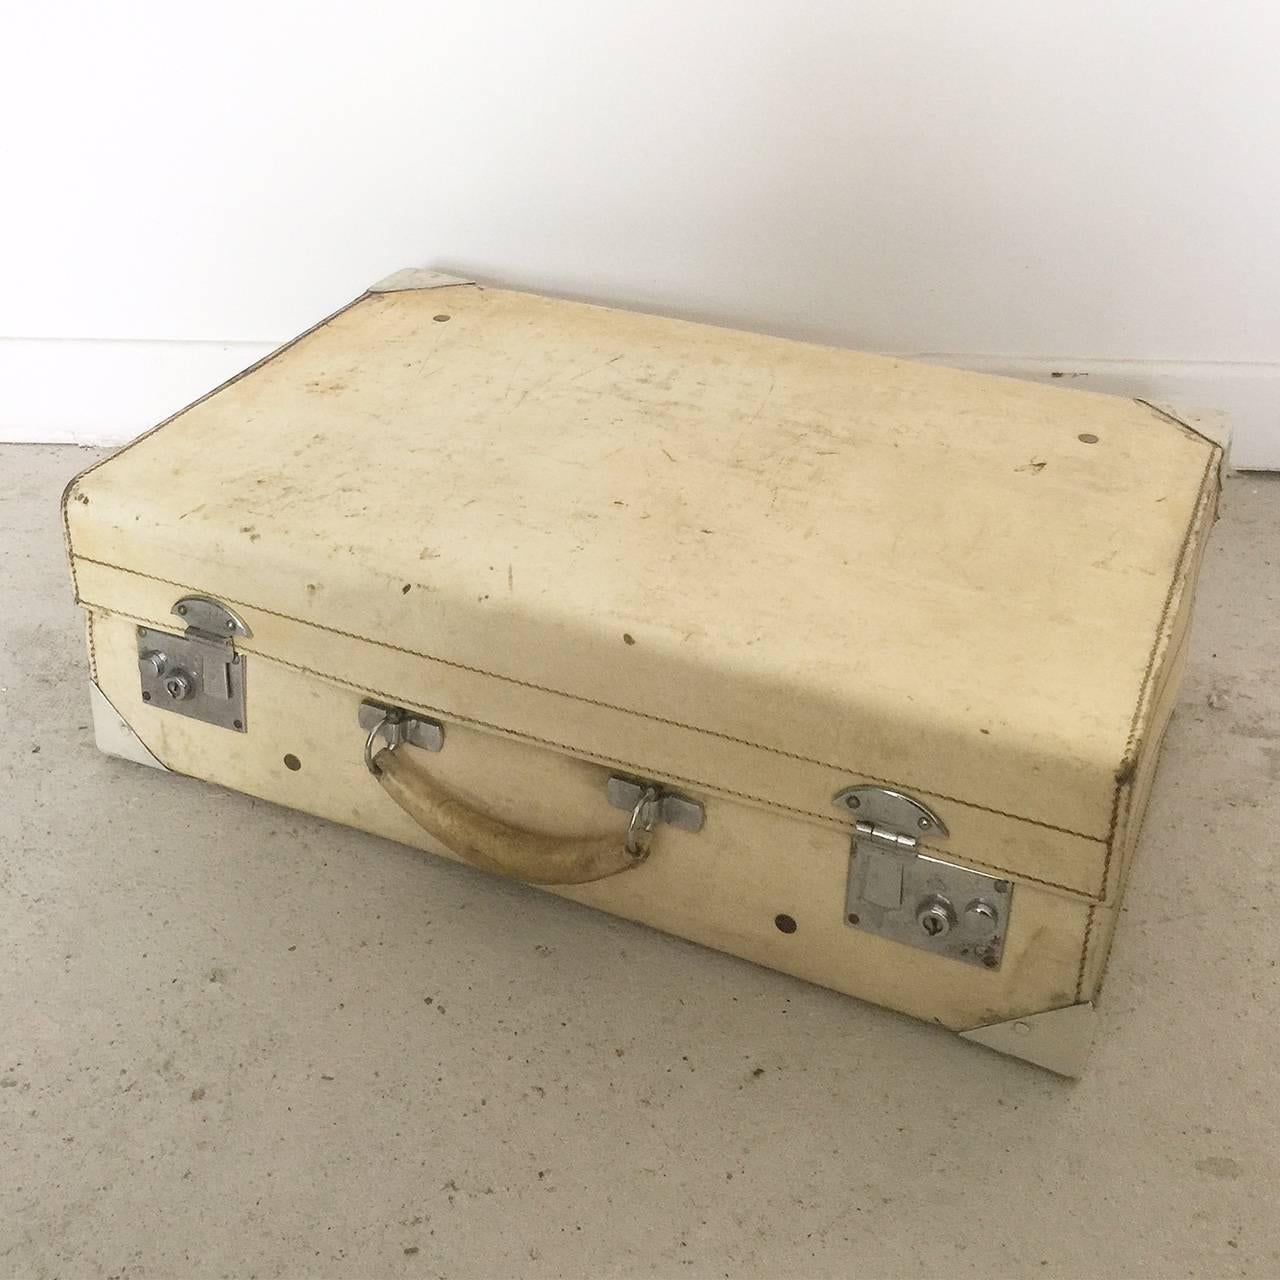 Vintage vellum suitcase with nickel-plated hardware.